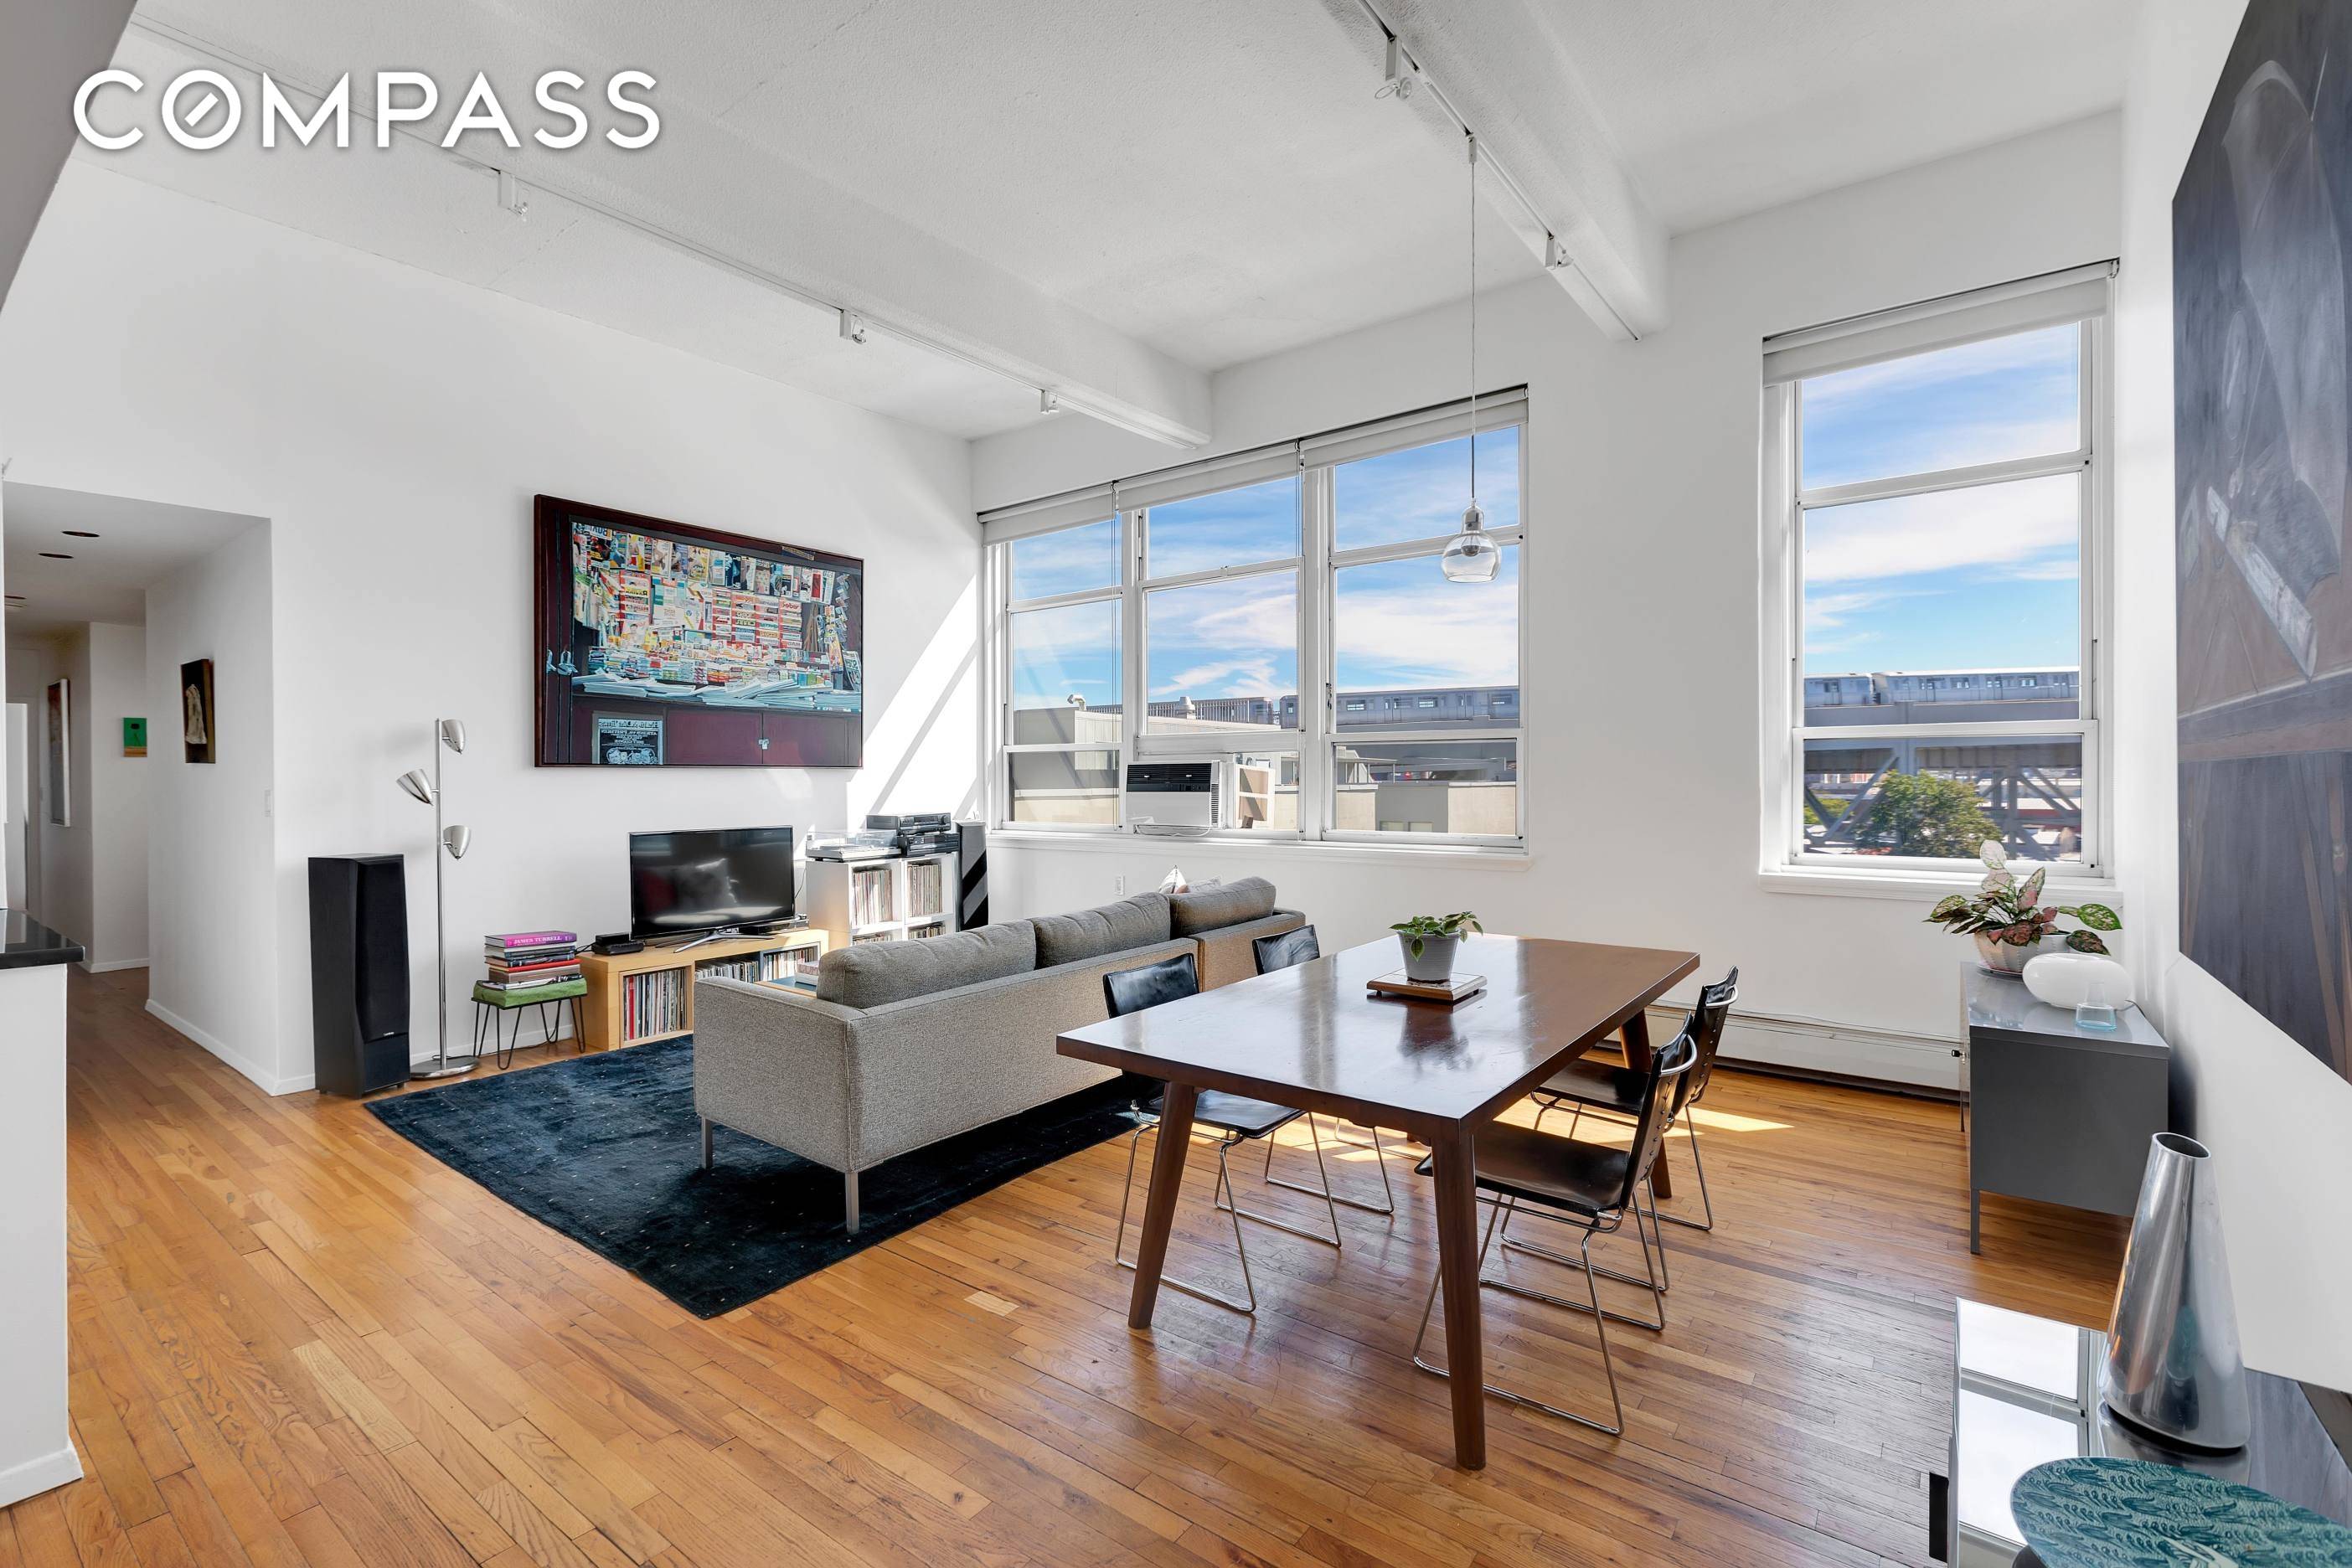 Welcome to this grand sun drenched 3 bedroom, 2 bath condo at Court Street Lofts in the heart of Carroll Gardens.